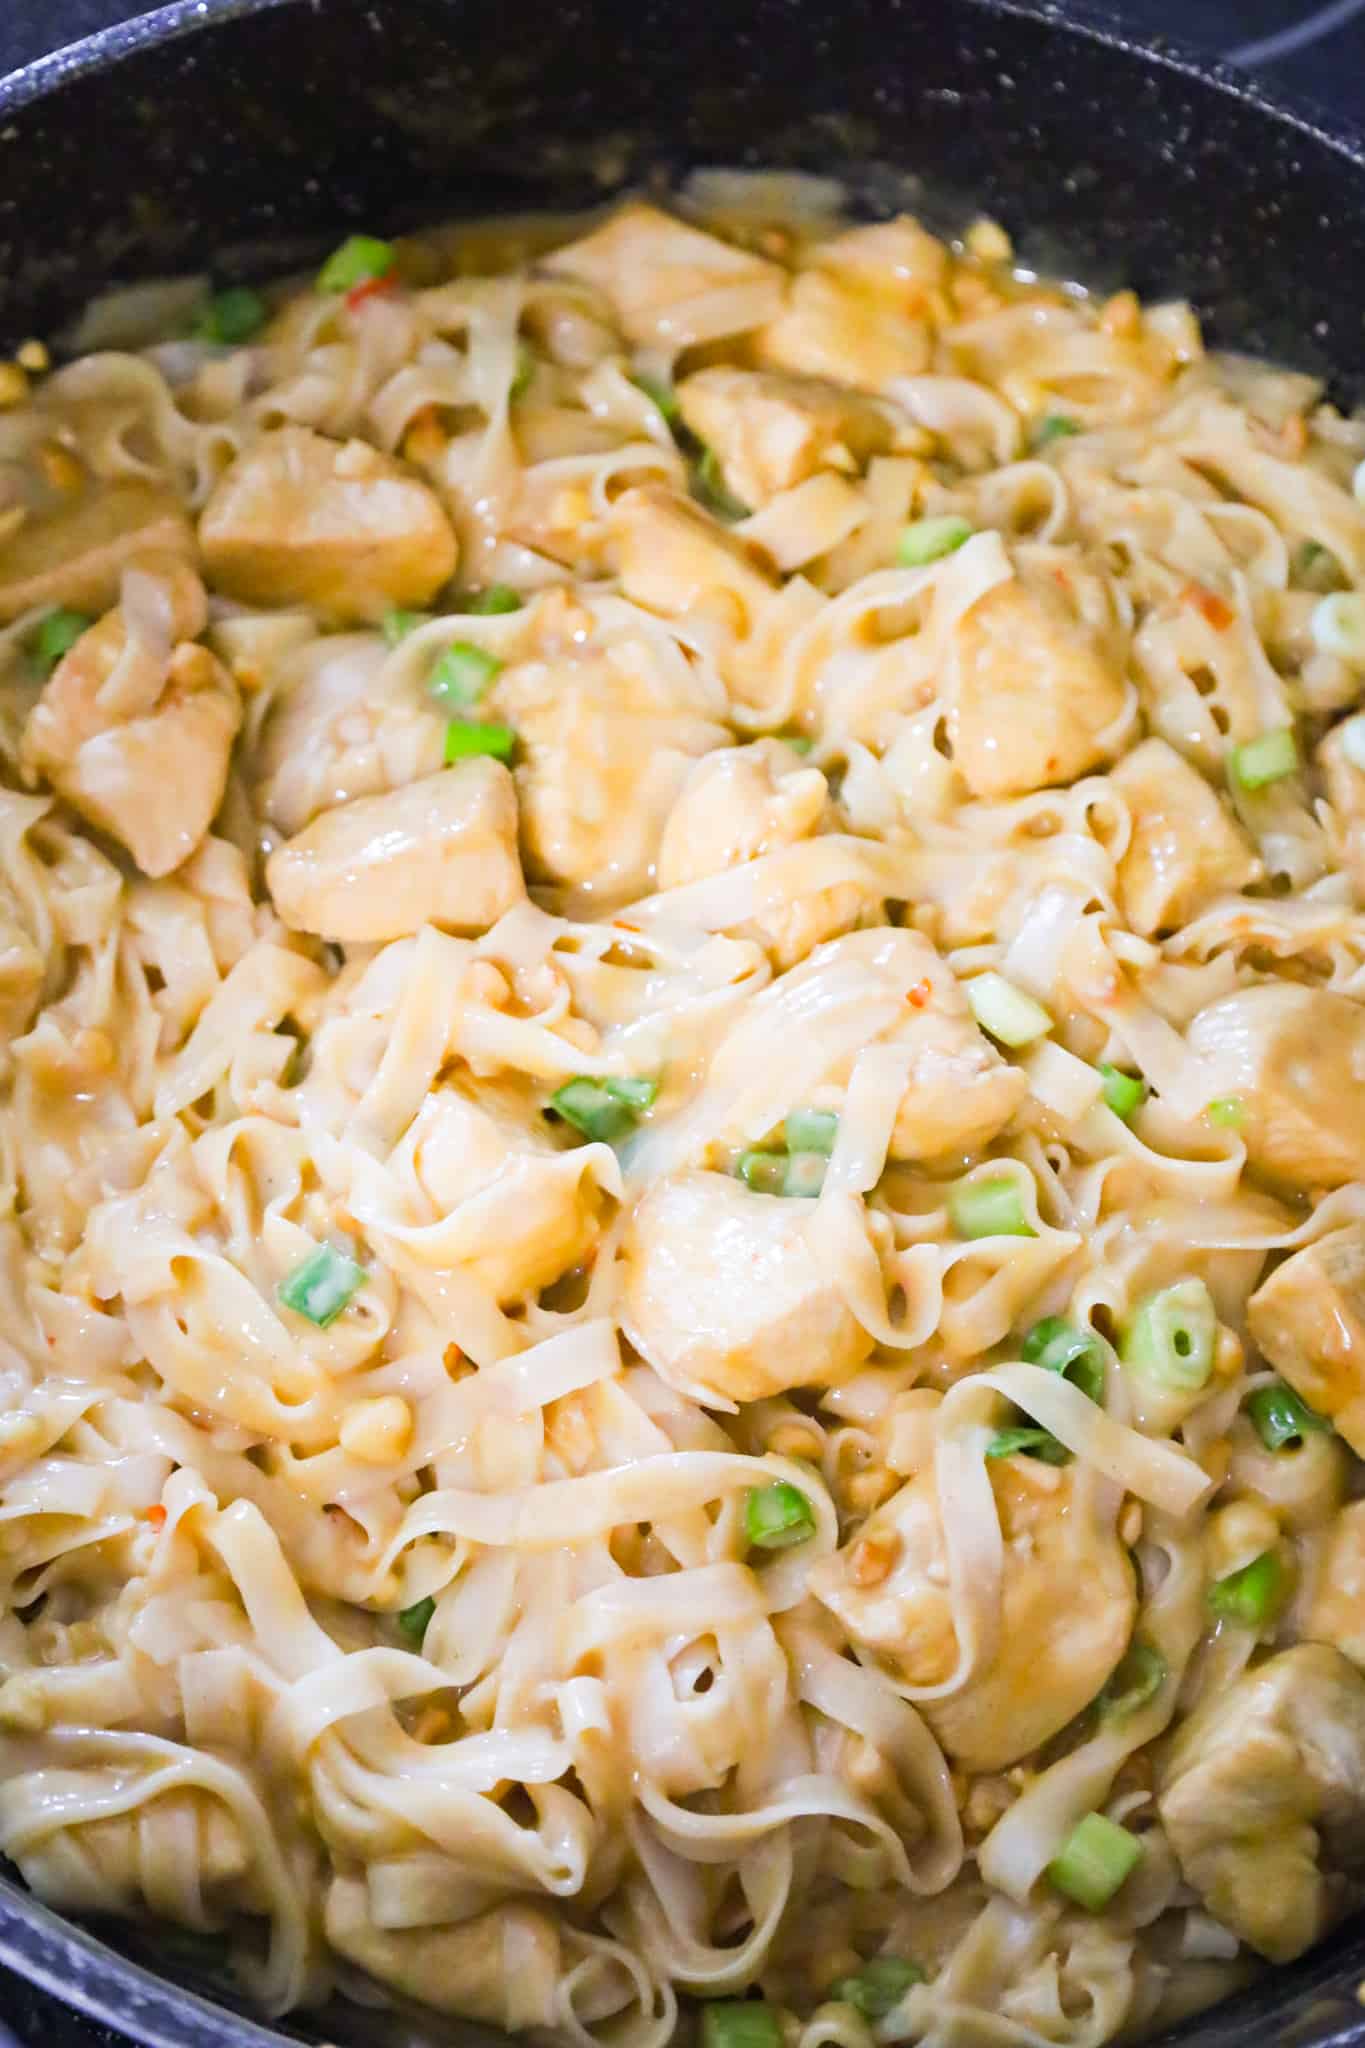 rice noodles and chicken breast chunks tossed in peanut sauce in a saute pan